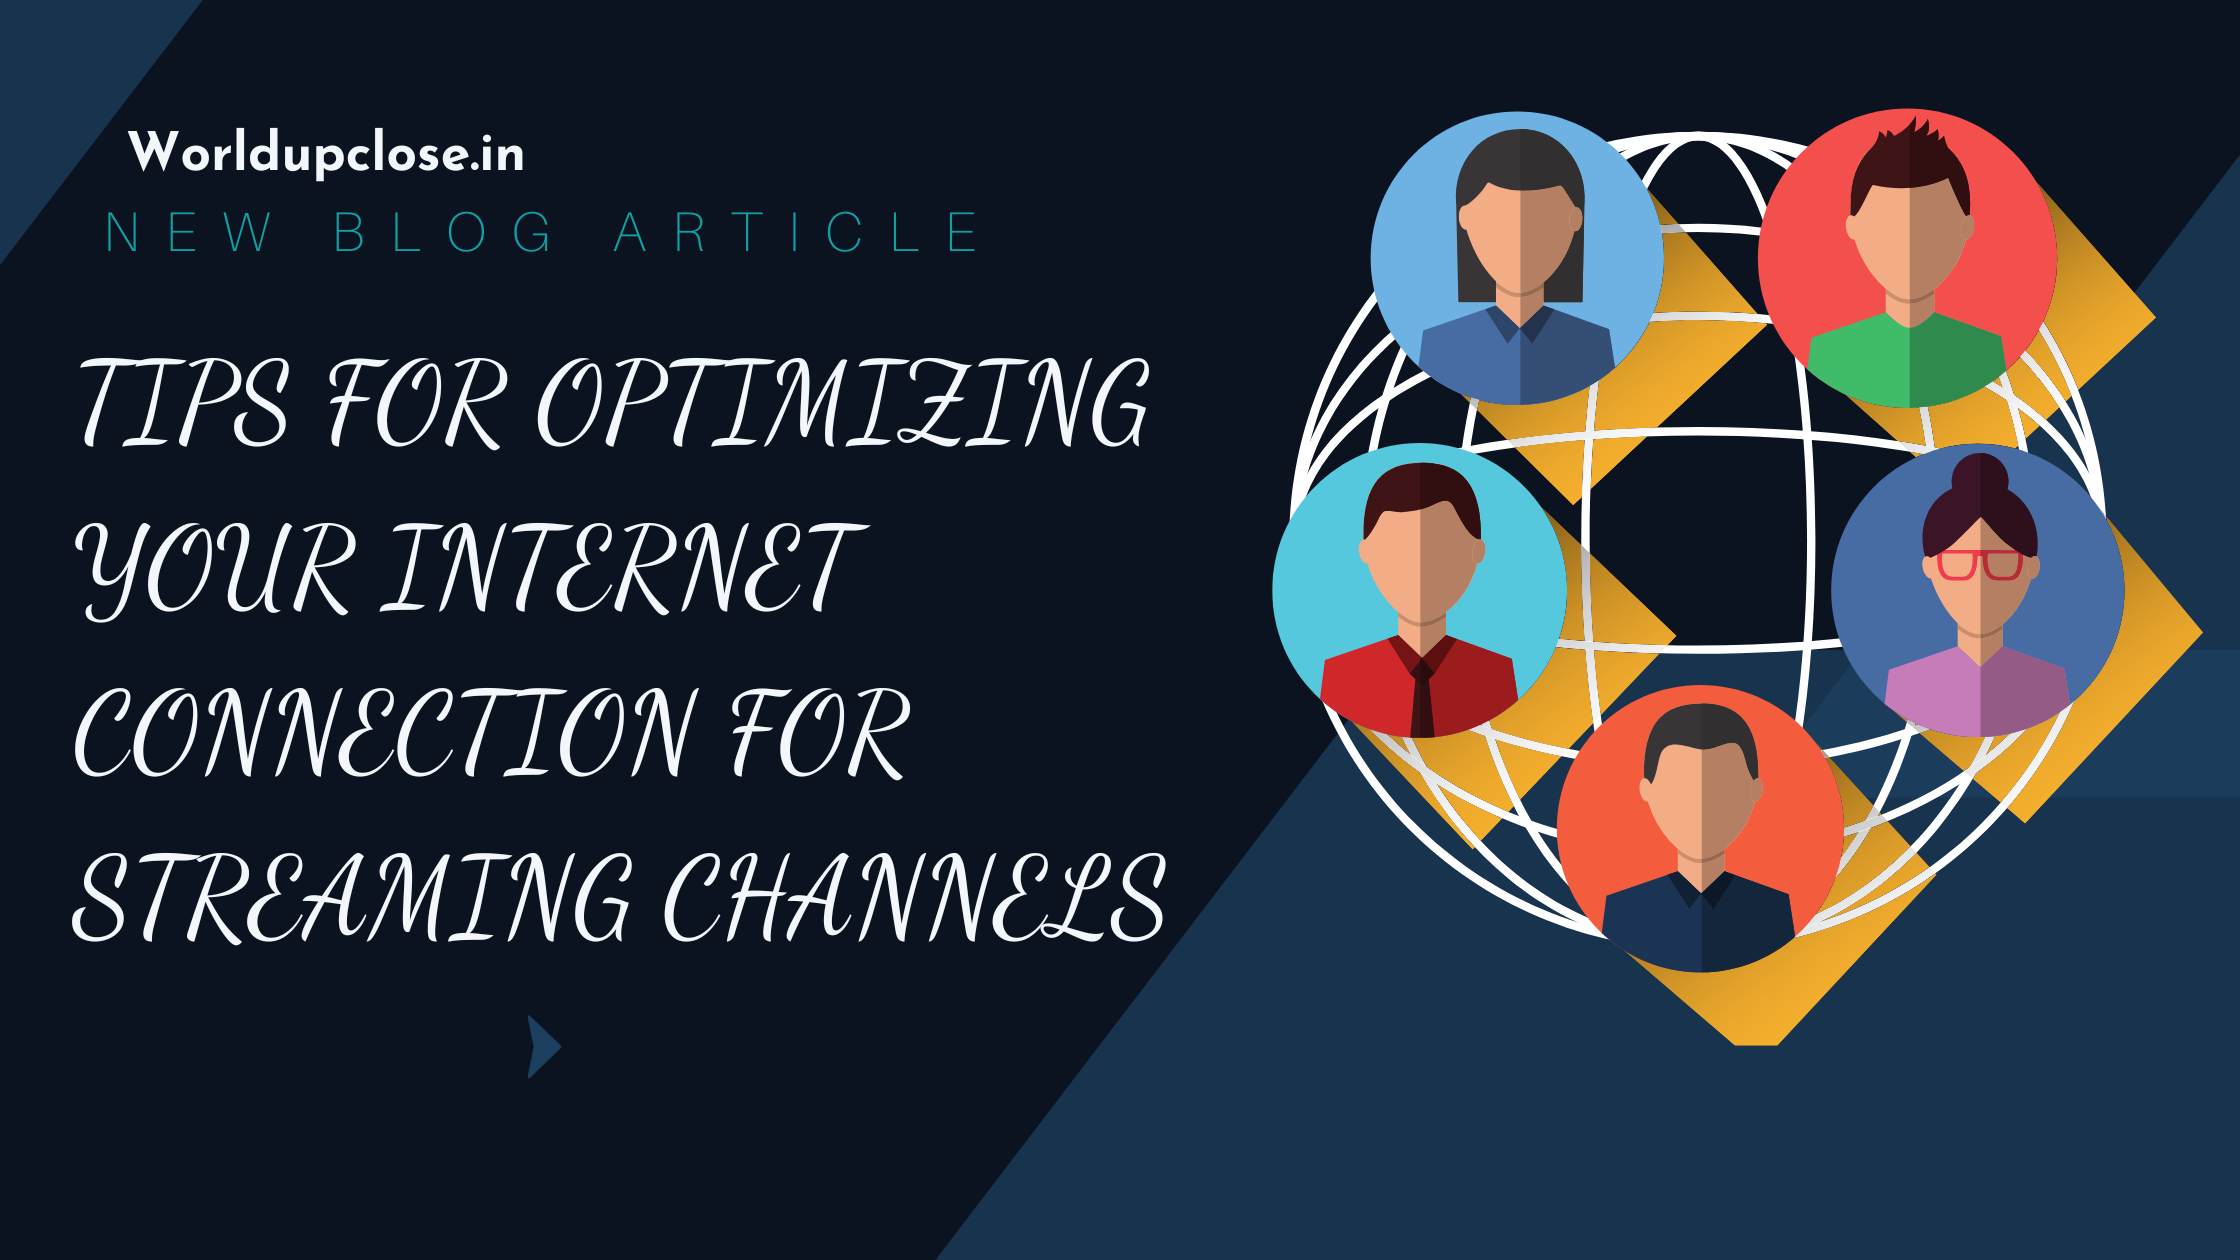 7 Tips for Optimizing Your Internet Connection for Streaming Channels 9